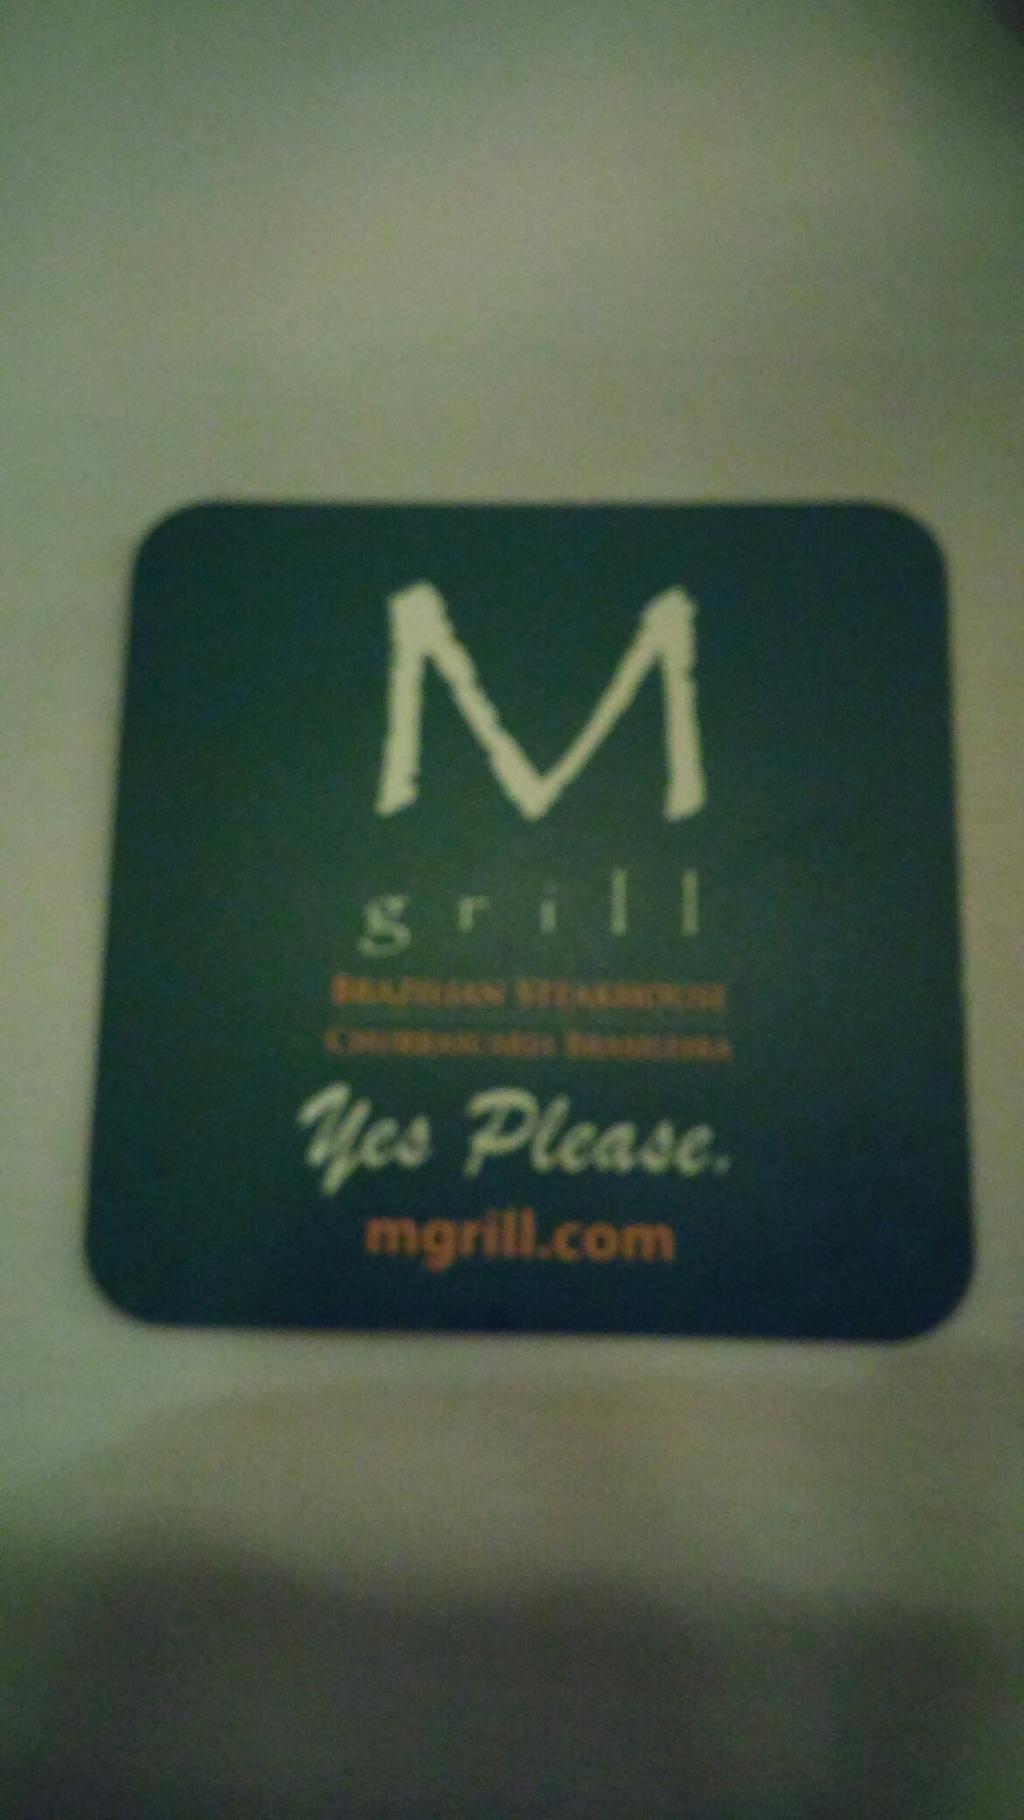 M Grill